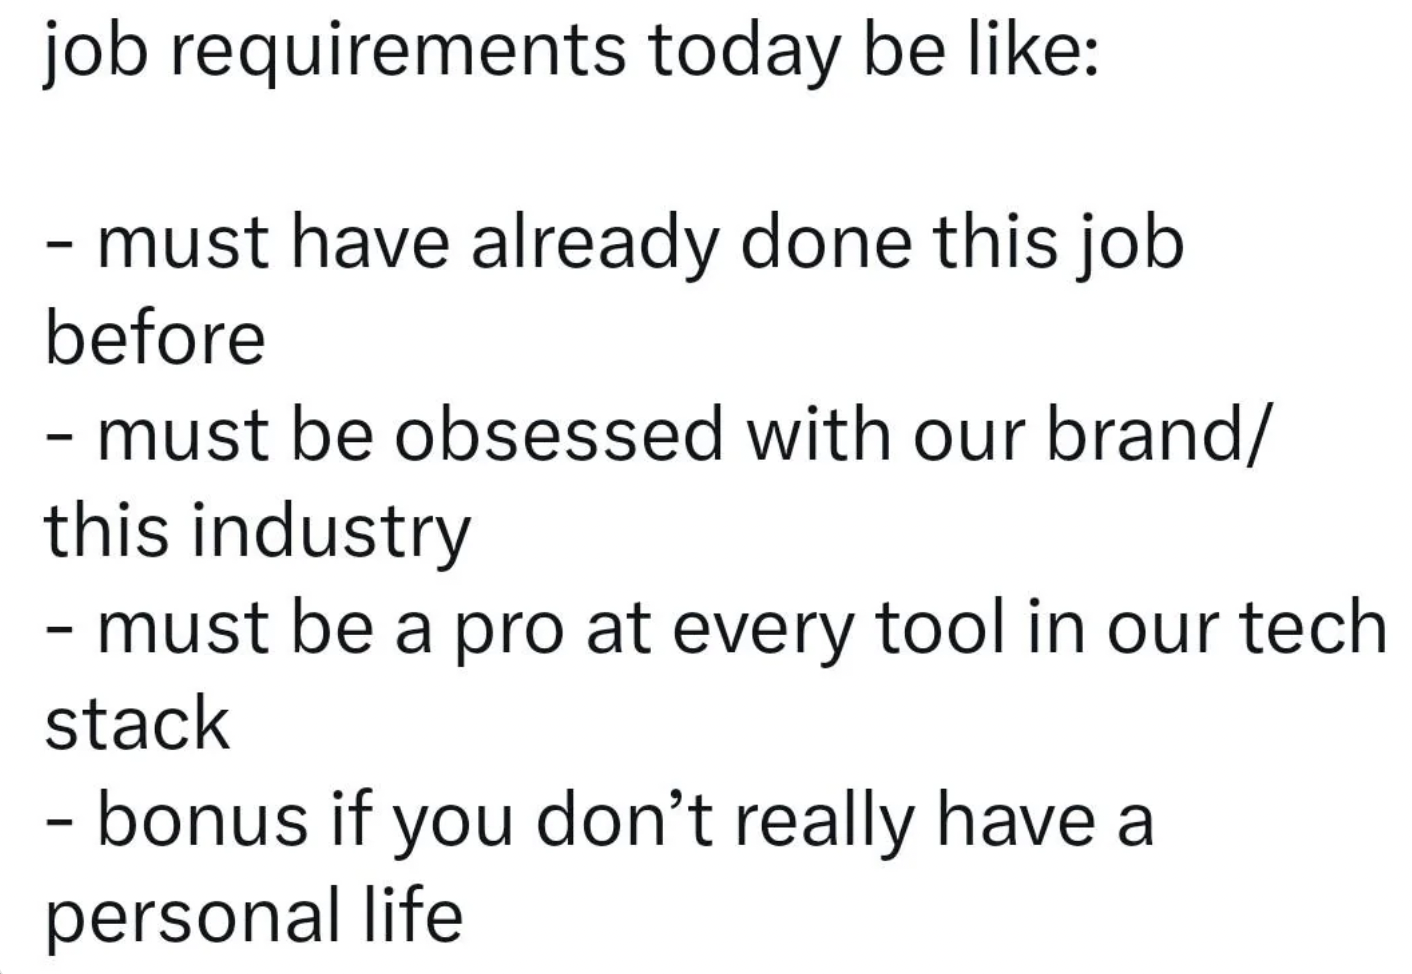 number - job requirements today be must have already done this job before must be obsessed with our brand this industry must be a pro at every tool in our tech stack bonus if you don't really have a personal life